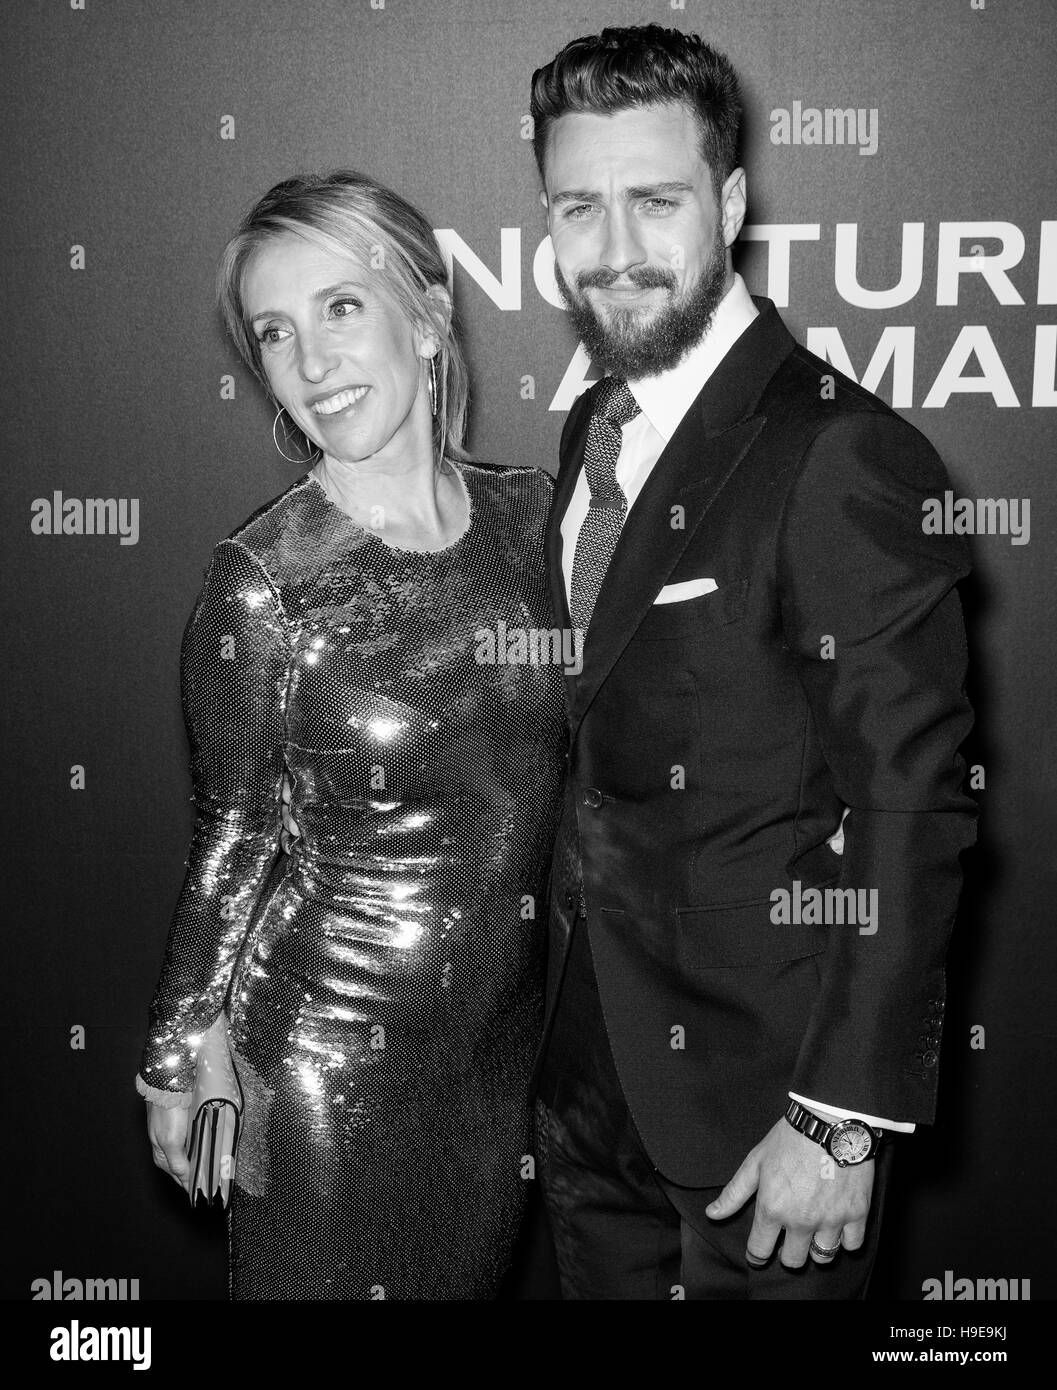 New York City, USA - November 17, 2016: Sam Taylor-Johnson (L) and actor Aaron Taylor-Johnson attend the 'Nocturnal Animals' New York premiere Stock Photo